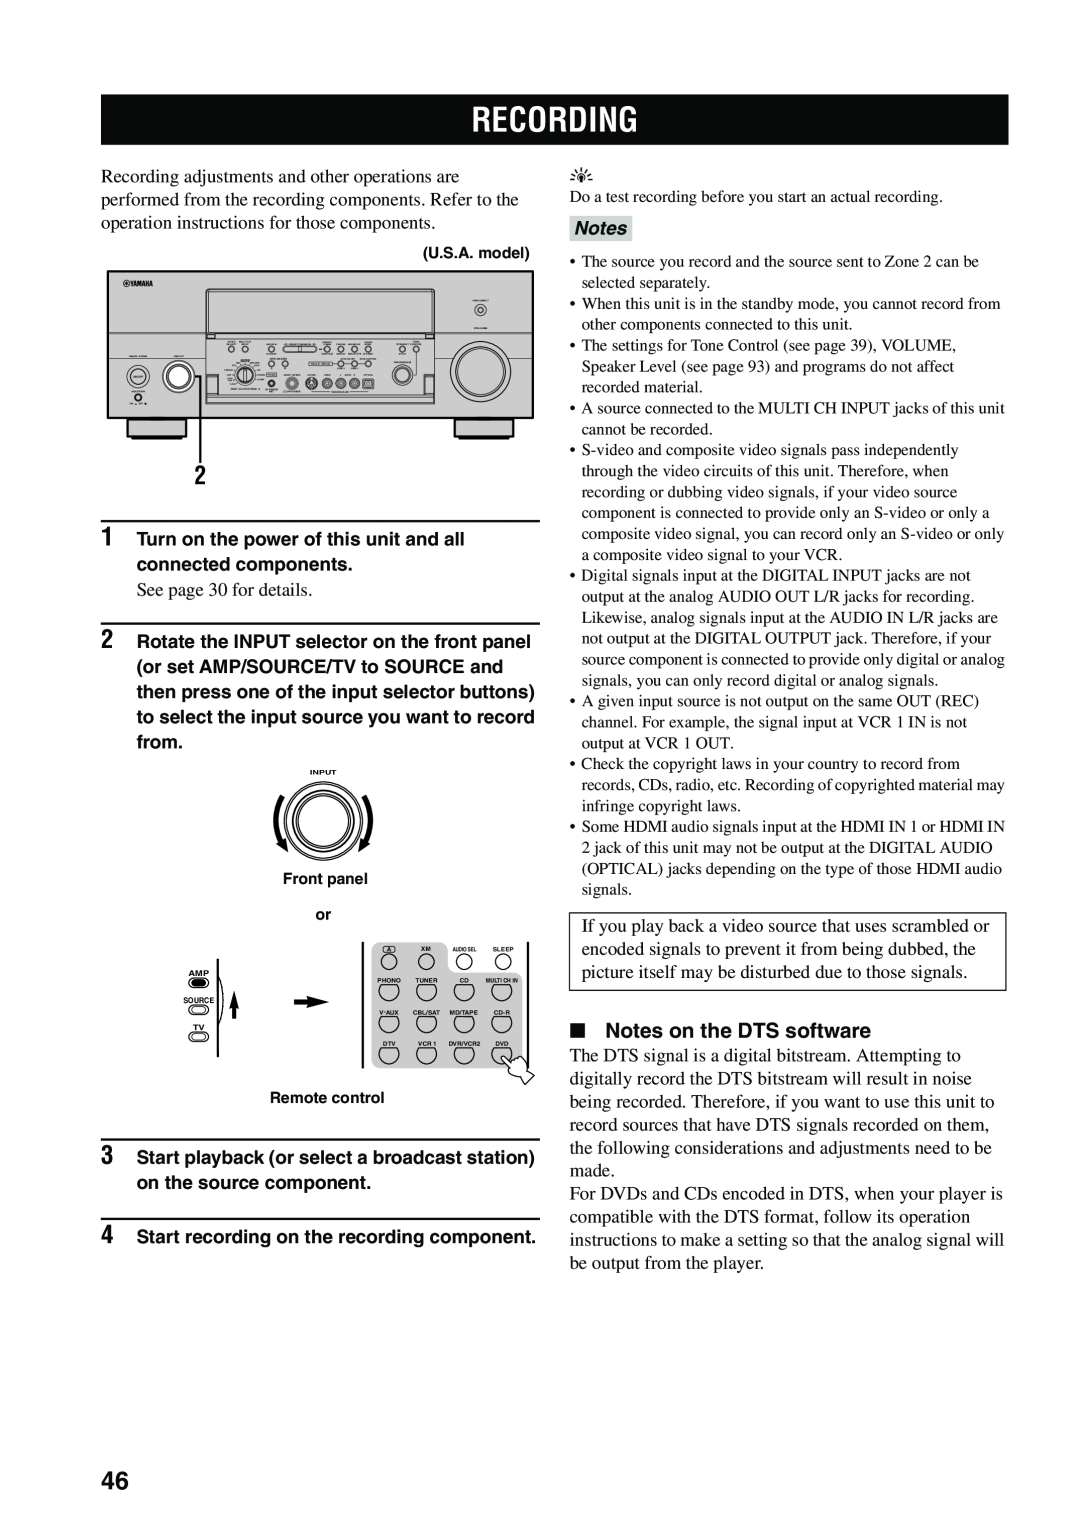 Yamaha X-V2600 owner manual Recording, Notes on the DTS software 